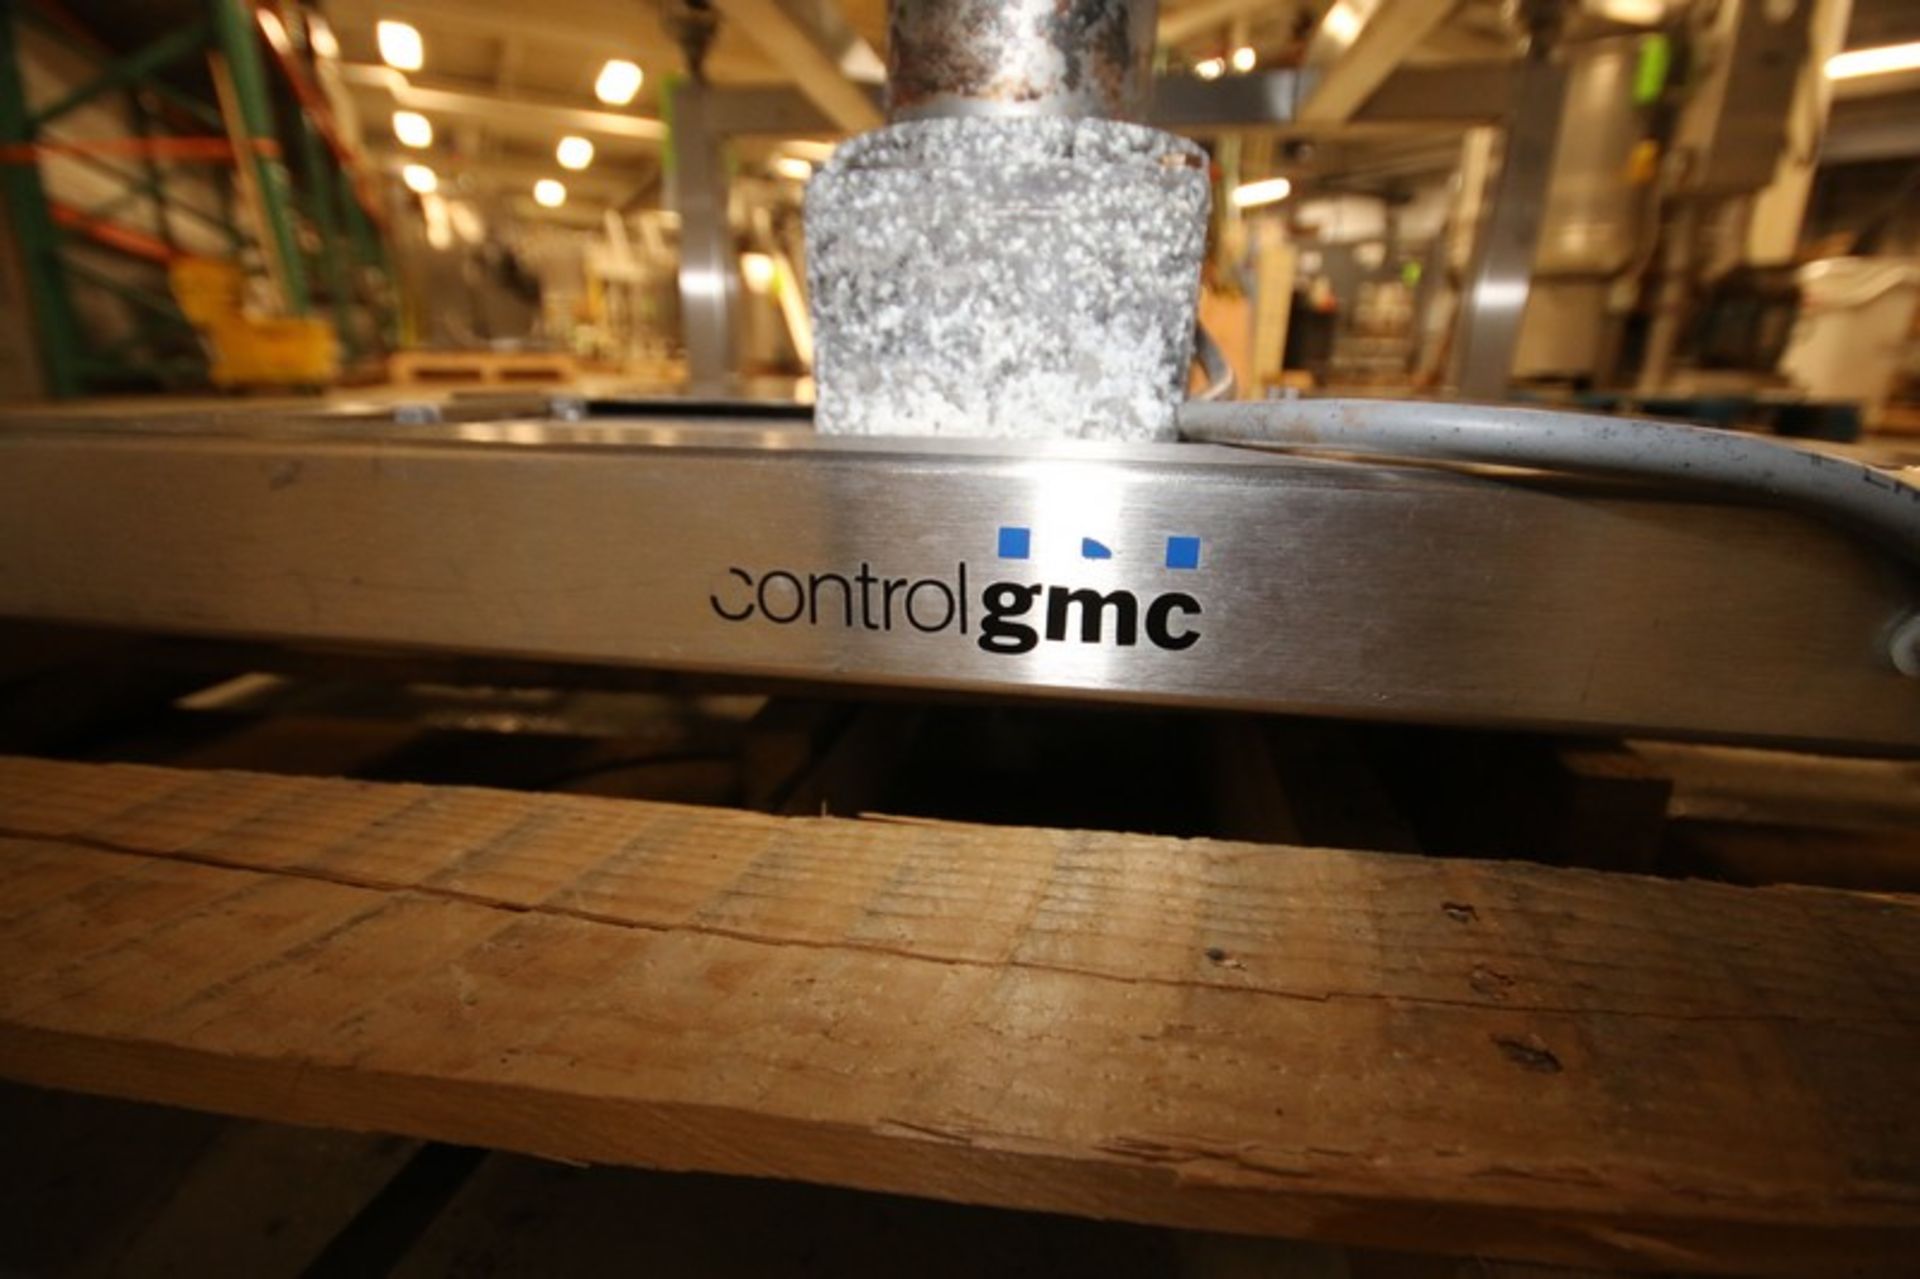 Control GMC 58" W Round S/S Accumulation Table, SN F0000244, 22" H S/S Frame, with VFD Controls, (3) - Image 5 of 6